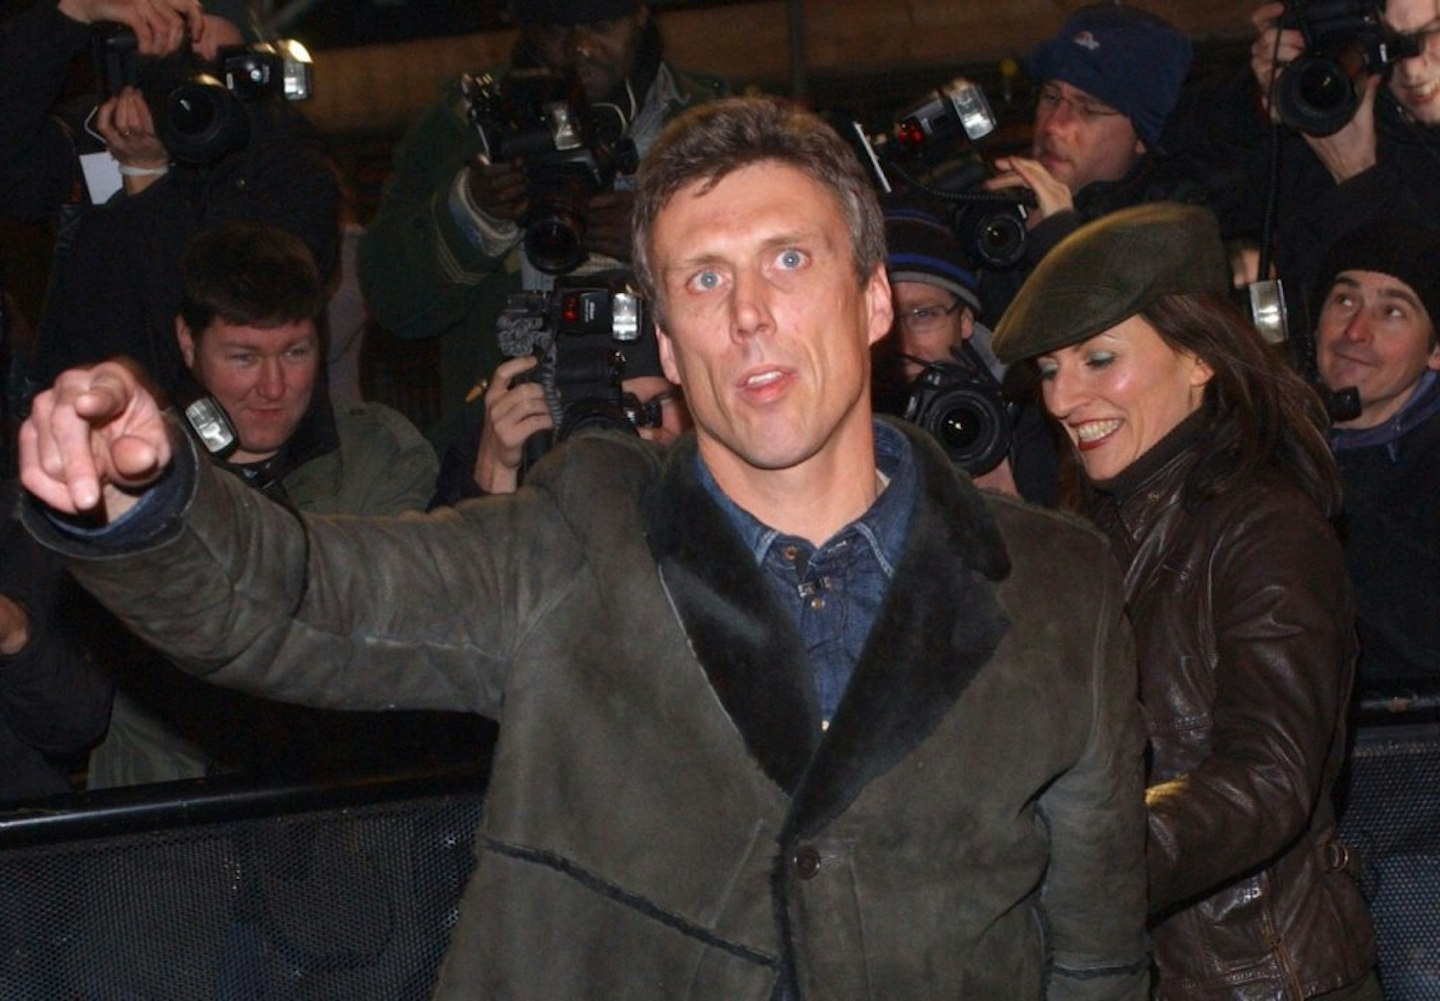 Bez pointing to the crowd